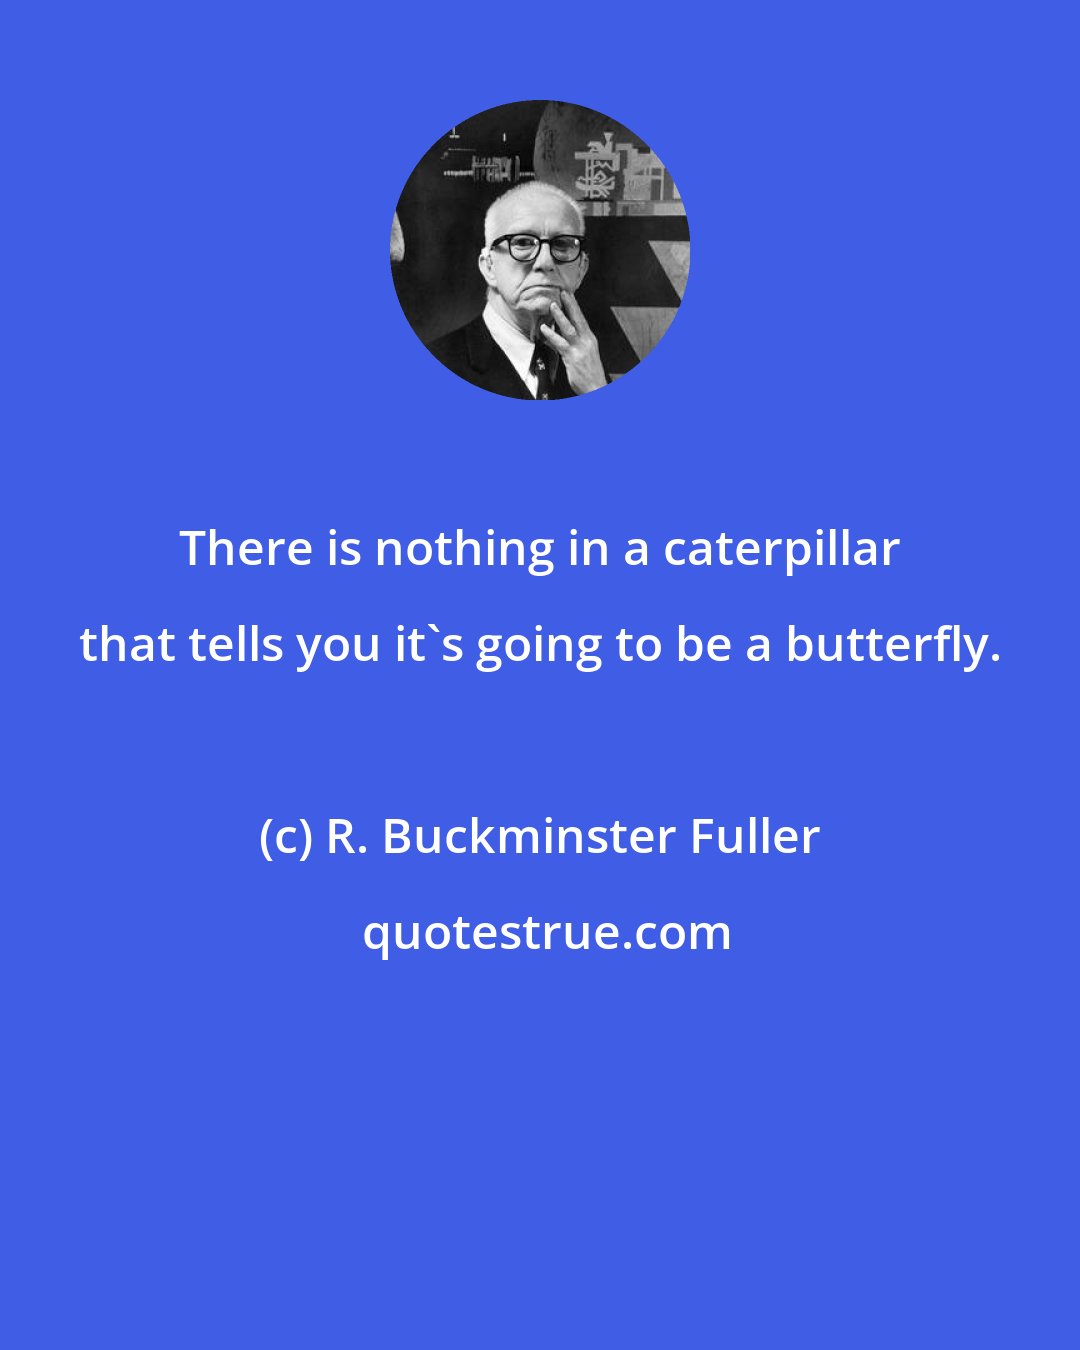 R. Buckminster Fuller: There is nothing in a caterpillar that tells you it's going to be a butterfly.